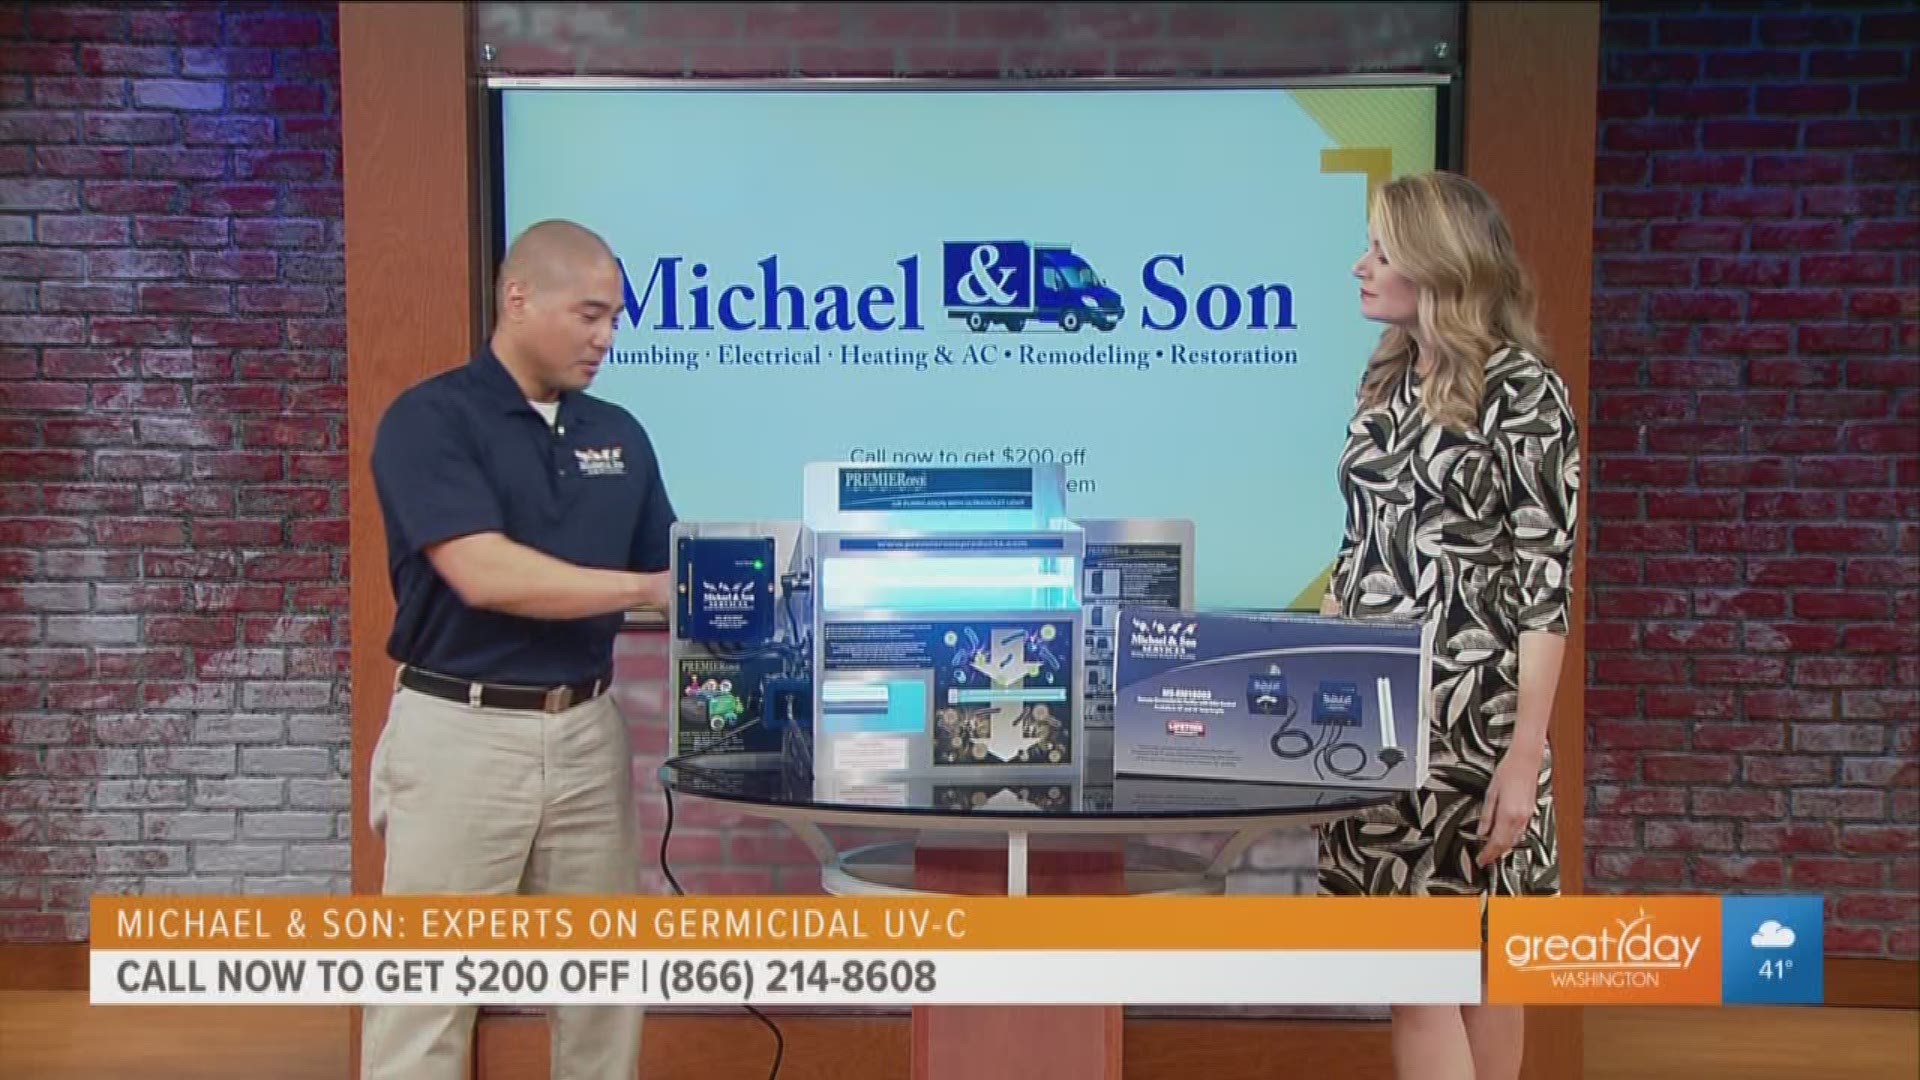 Fight airborne viruses with Michael & Son's Germicidal UV-C System. Call (866) 214-8608 for $200 off. This segment is sponsored by Michael and Son.